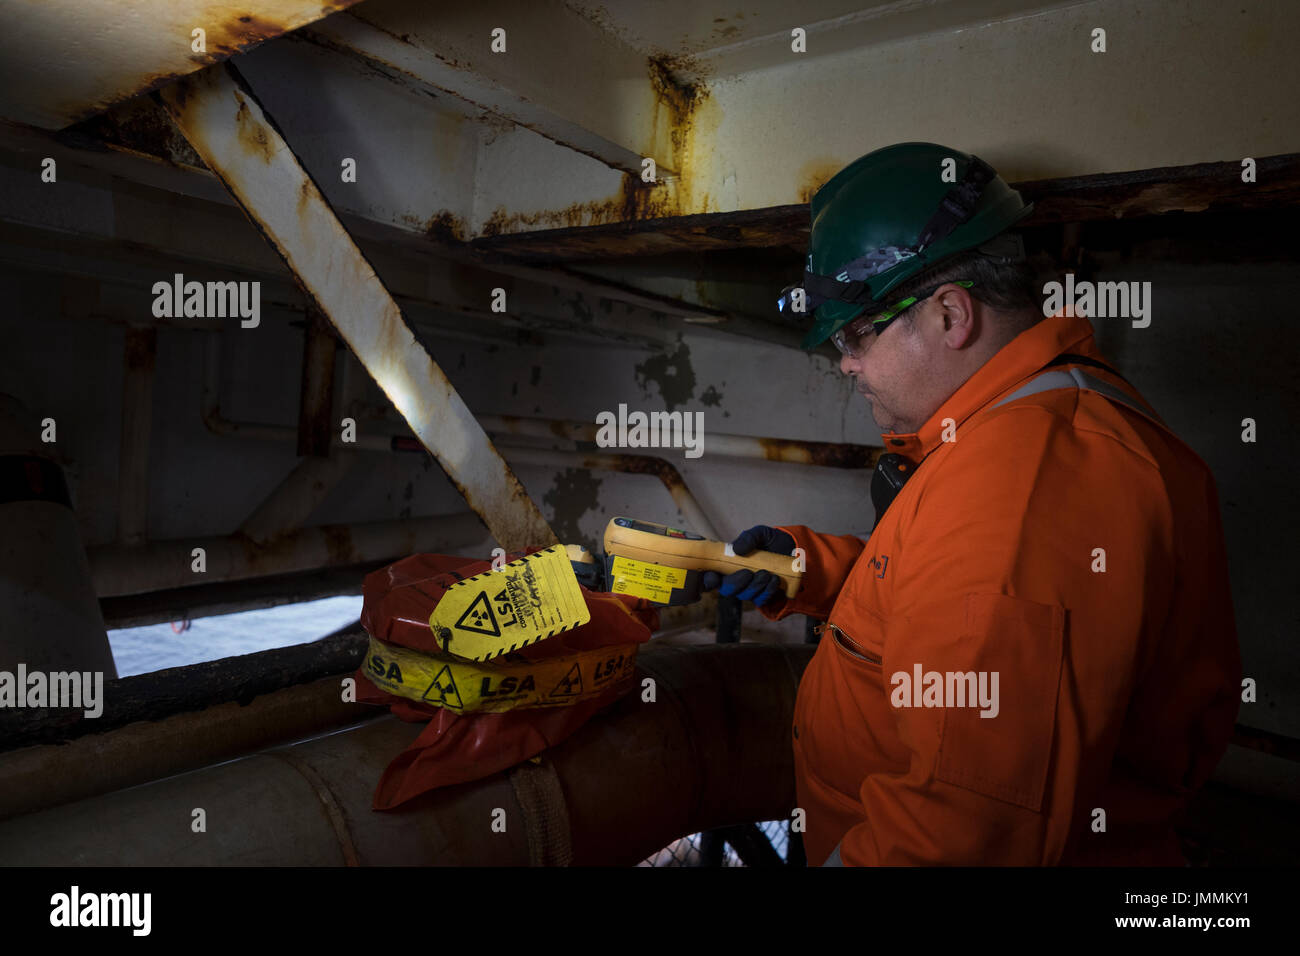 Image of an offshore industrial hygienist testing for LSA / NORM radioactive material. On a north sea oil and gas rig. credit: LEE RAMSDEN / ALAMY Stock Photo